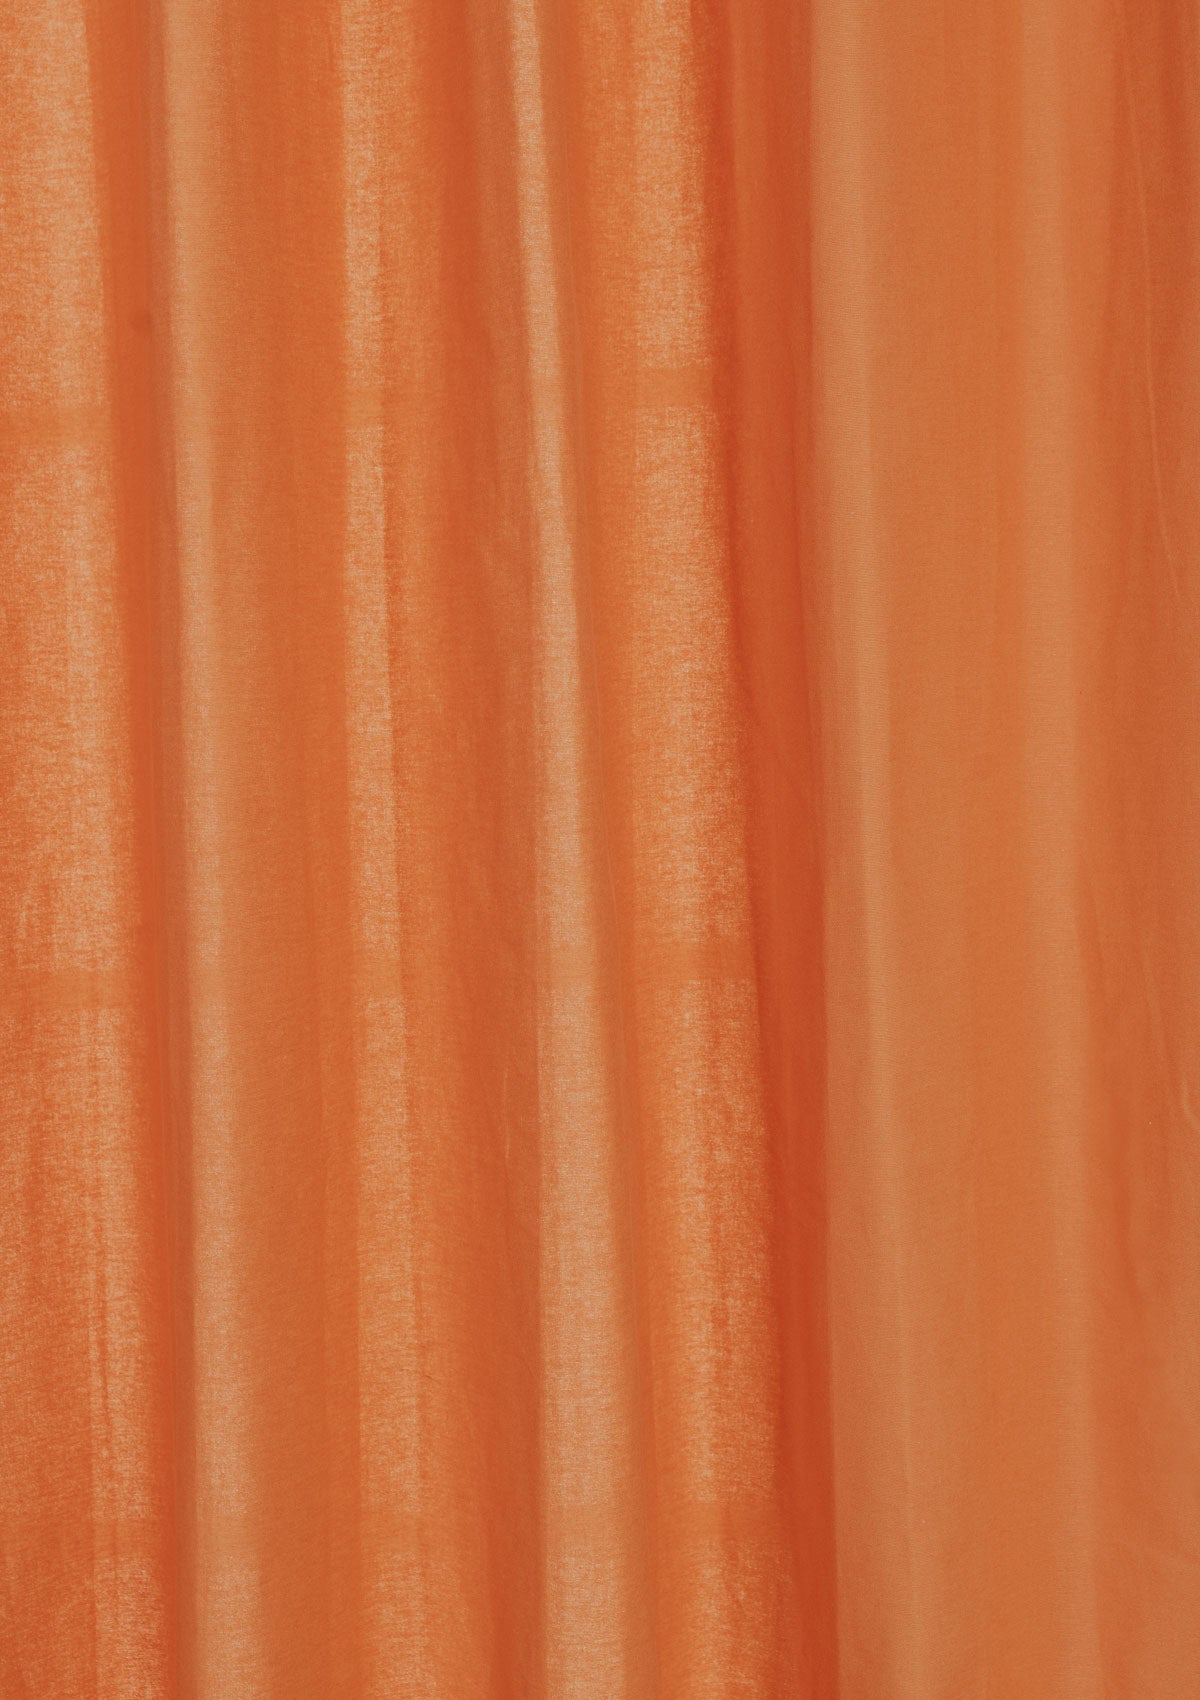 Solid premium 100% cotton floral fabric for curtain, cushion cover, dining, blinds - Room darkening - Orange